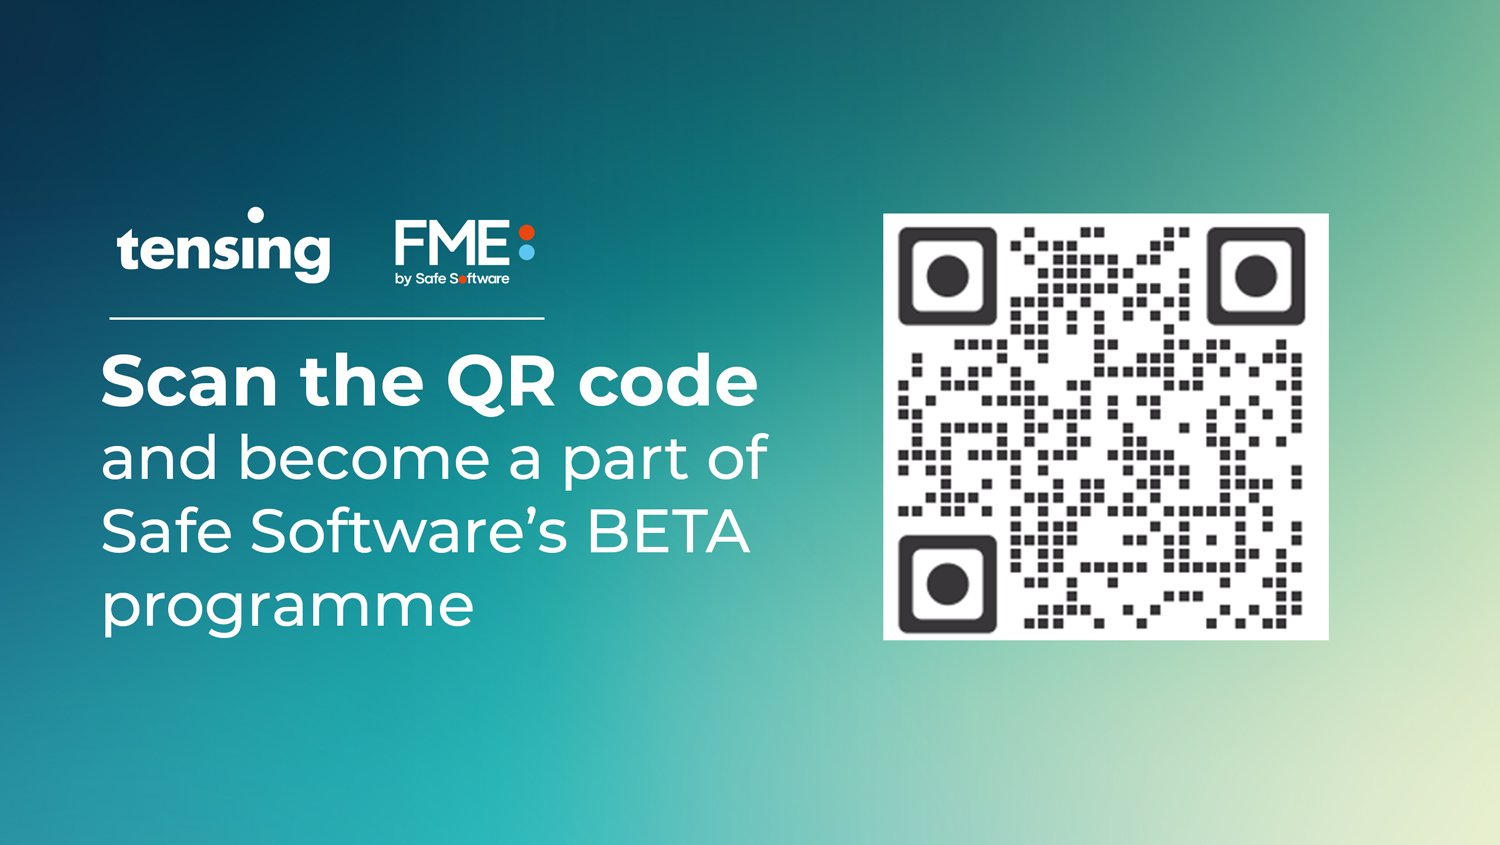 Become a part of Safe Software's BETA programme